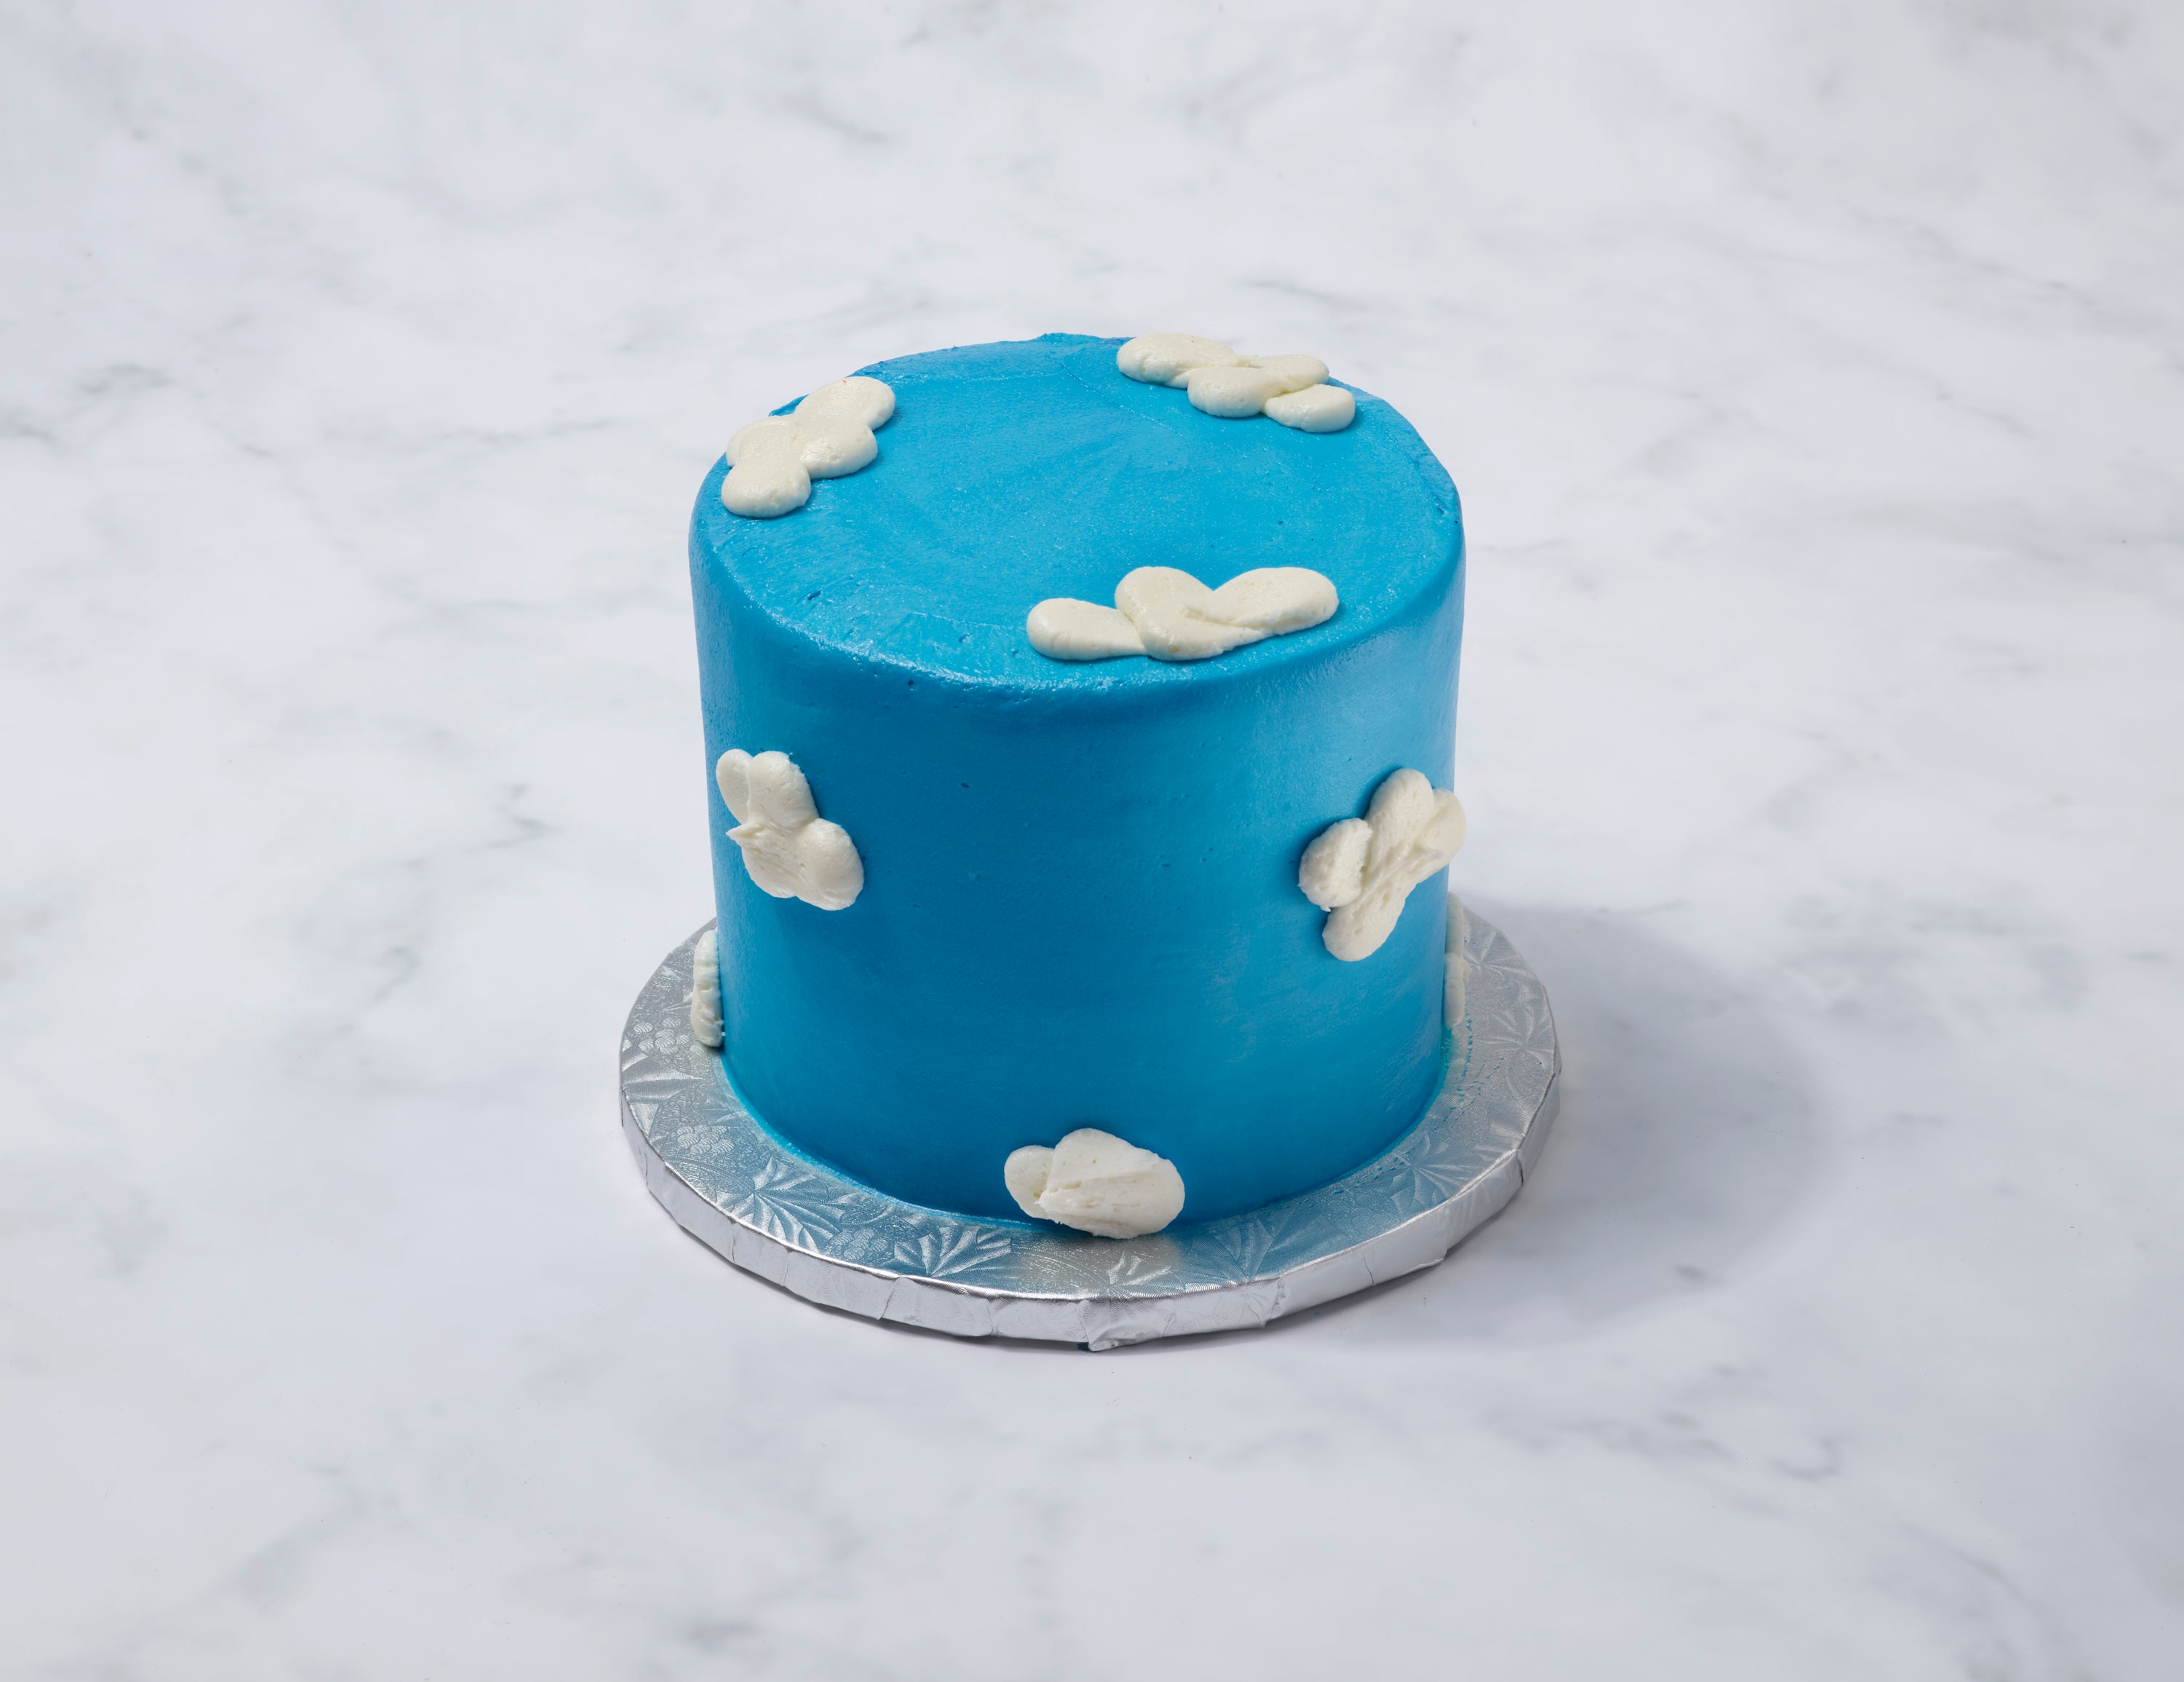 How to Make Fondant Clouds without Cutters | Decorated Treats